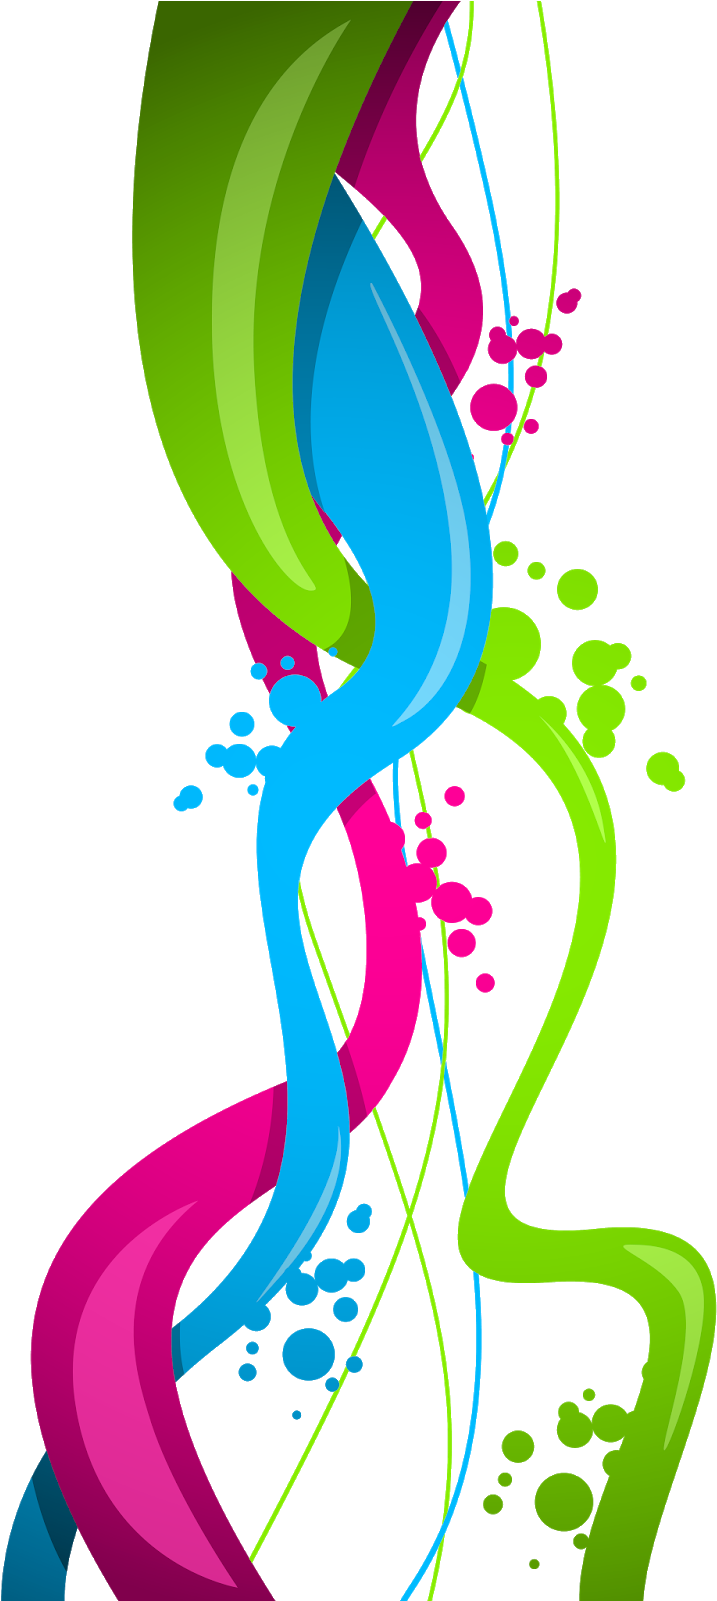 Colorful Abstract Graphic Design PNG Transparent Image